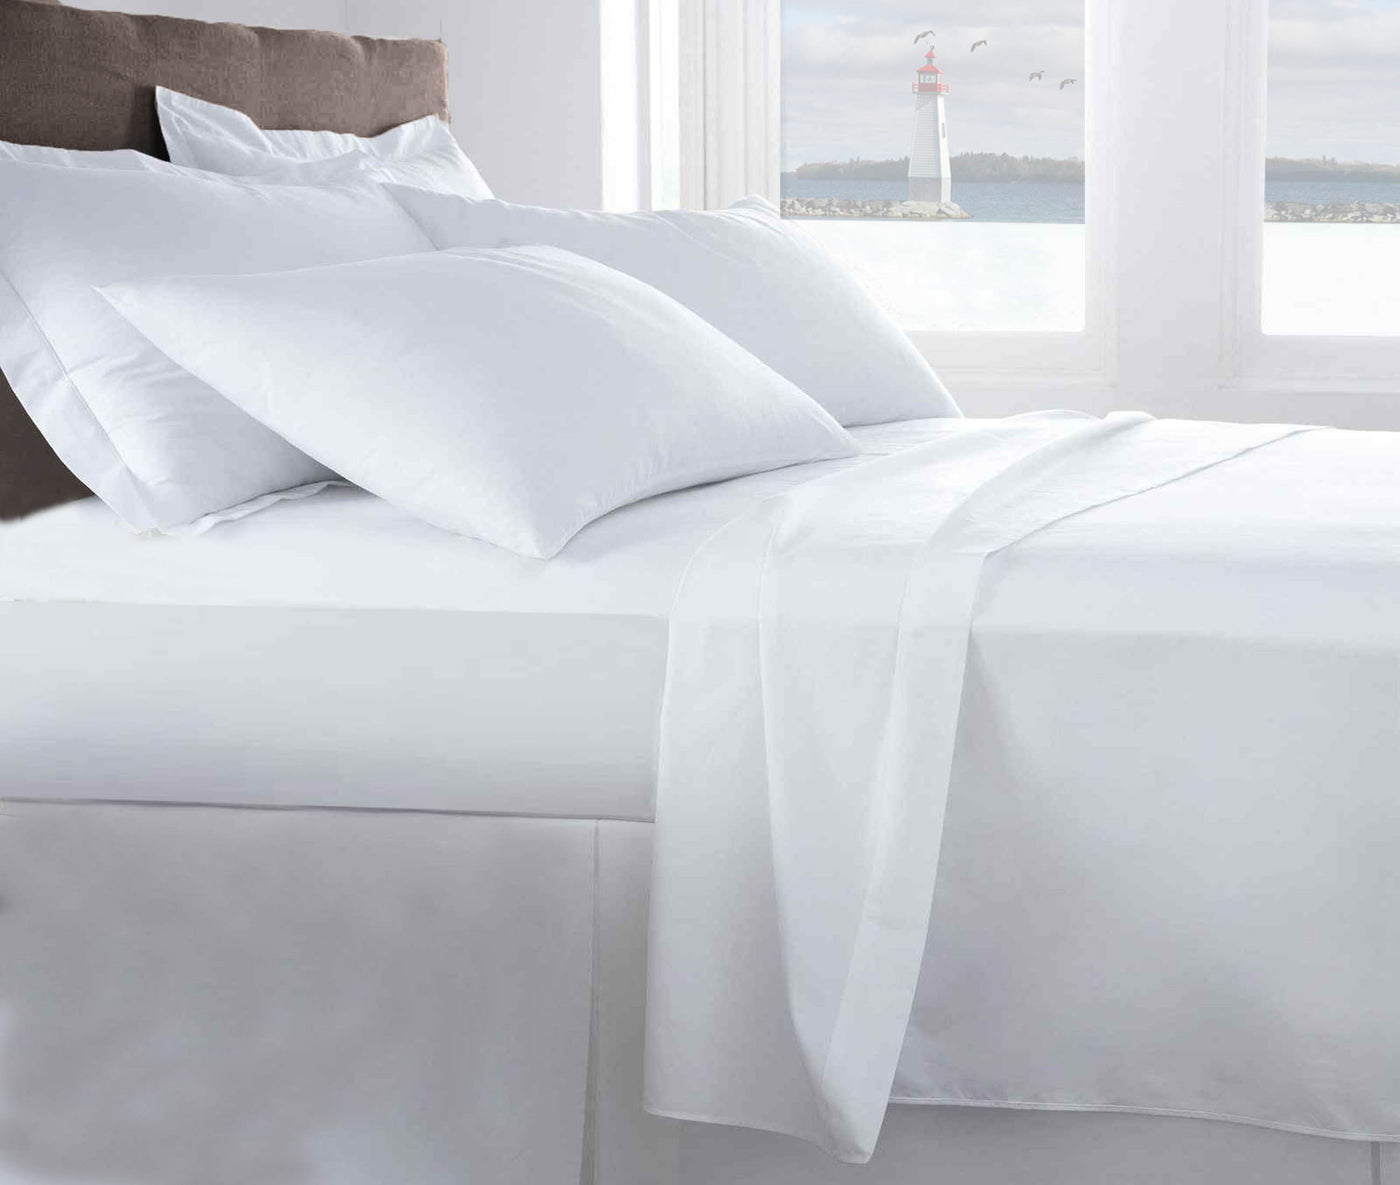 Thread 250 white flat sheet on the bed with hypoallergenic pillows